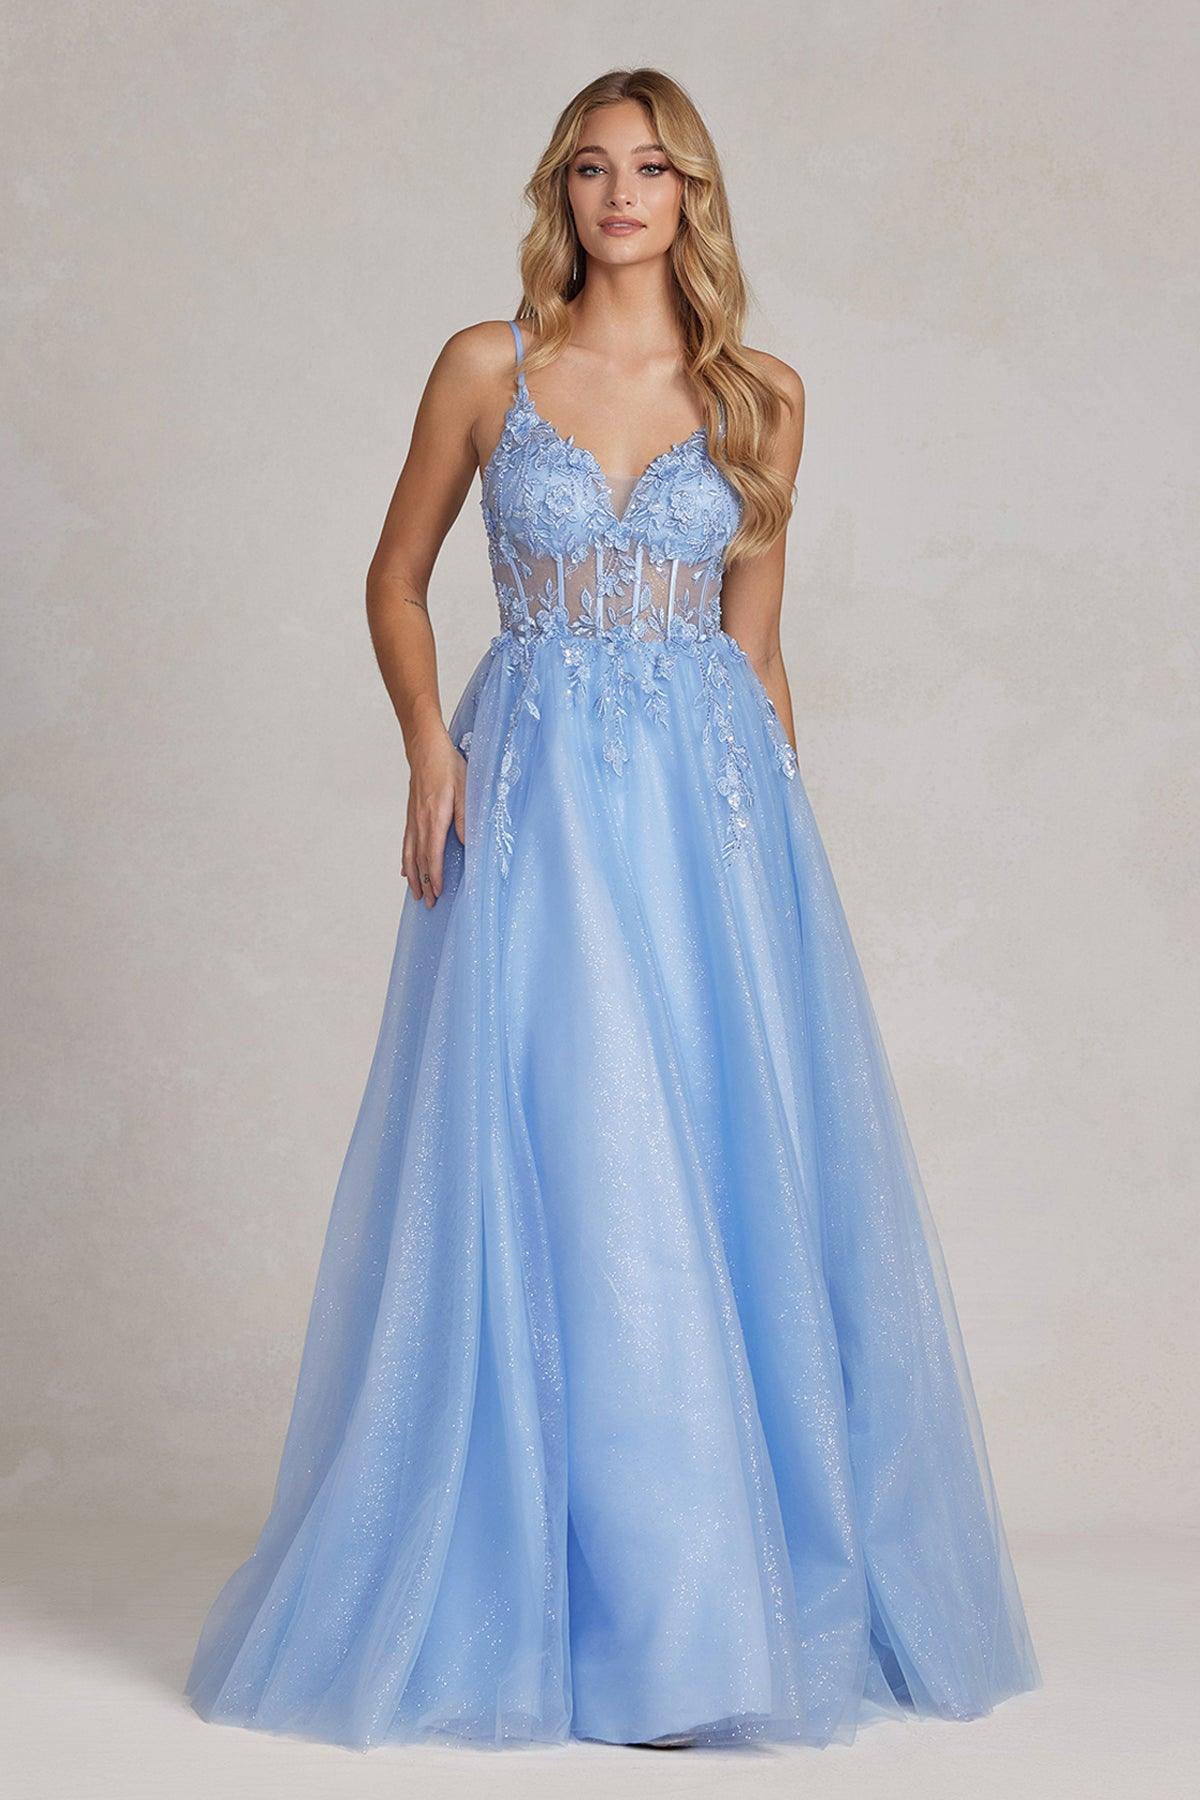 Nox Anabel T1083 Prom Long Spaghetti Strap Glitter Ball Gown Periwinkle